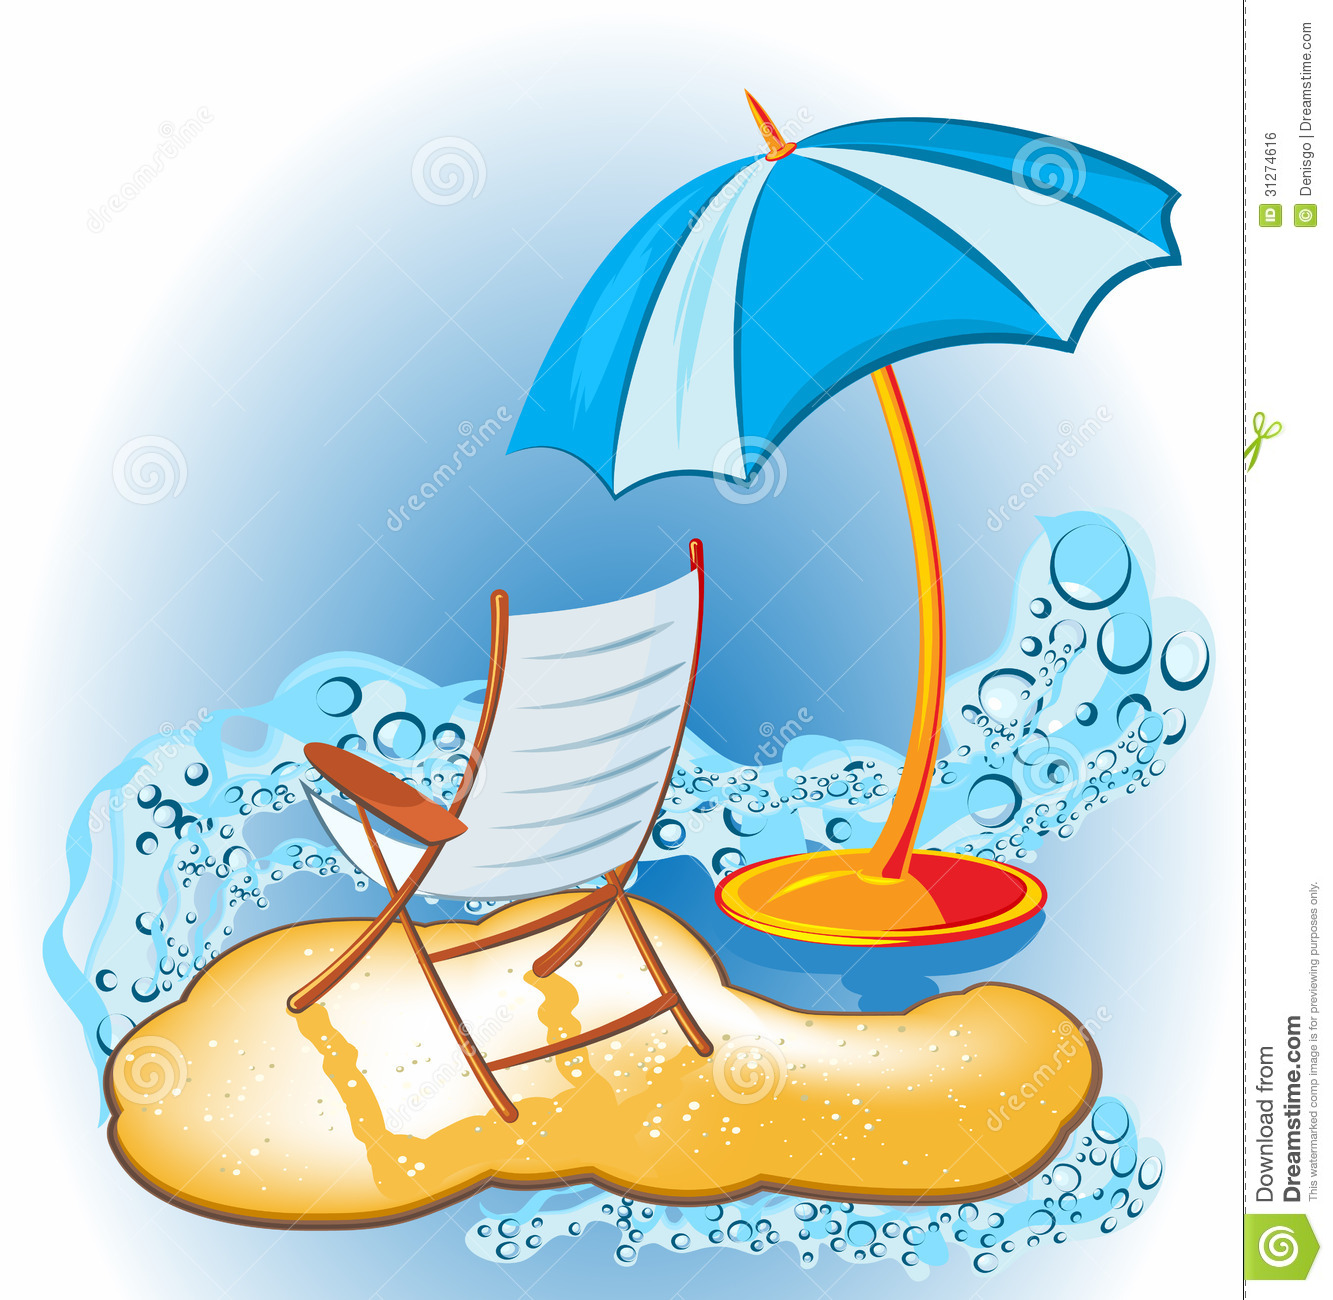 Summer Vacation Images   Clipart Panda   Free Clipart Images